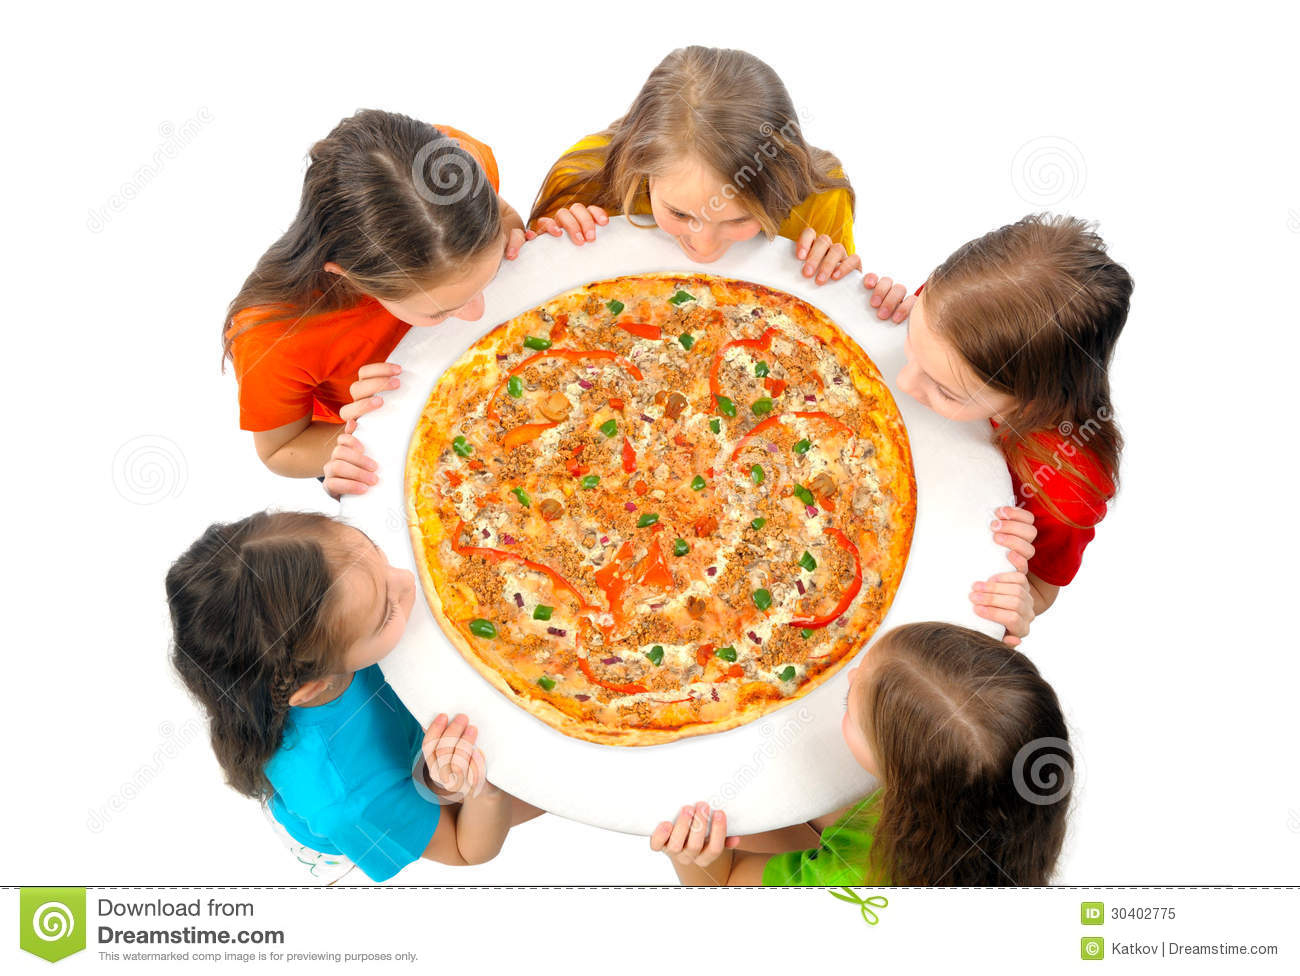 Children Eating Huge Pizza Royalty Free Stock Photo   Image  30402775